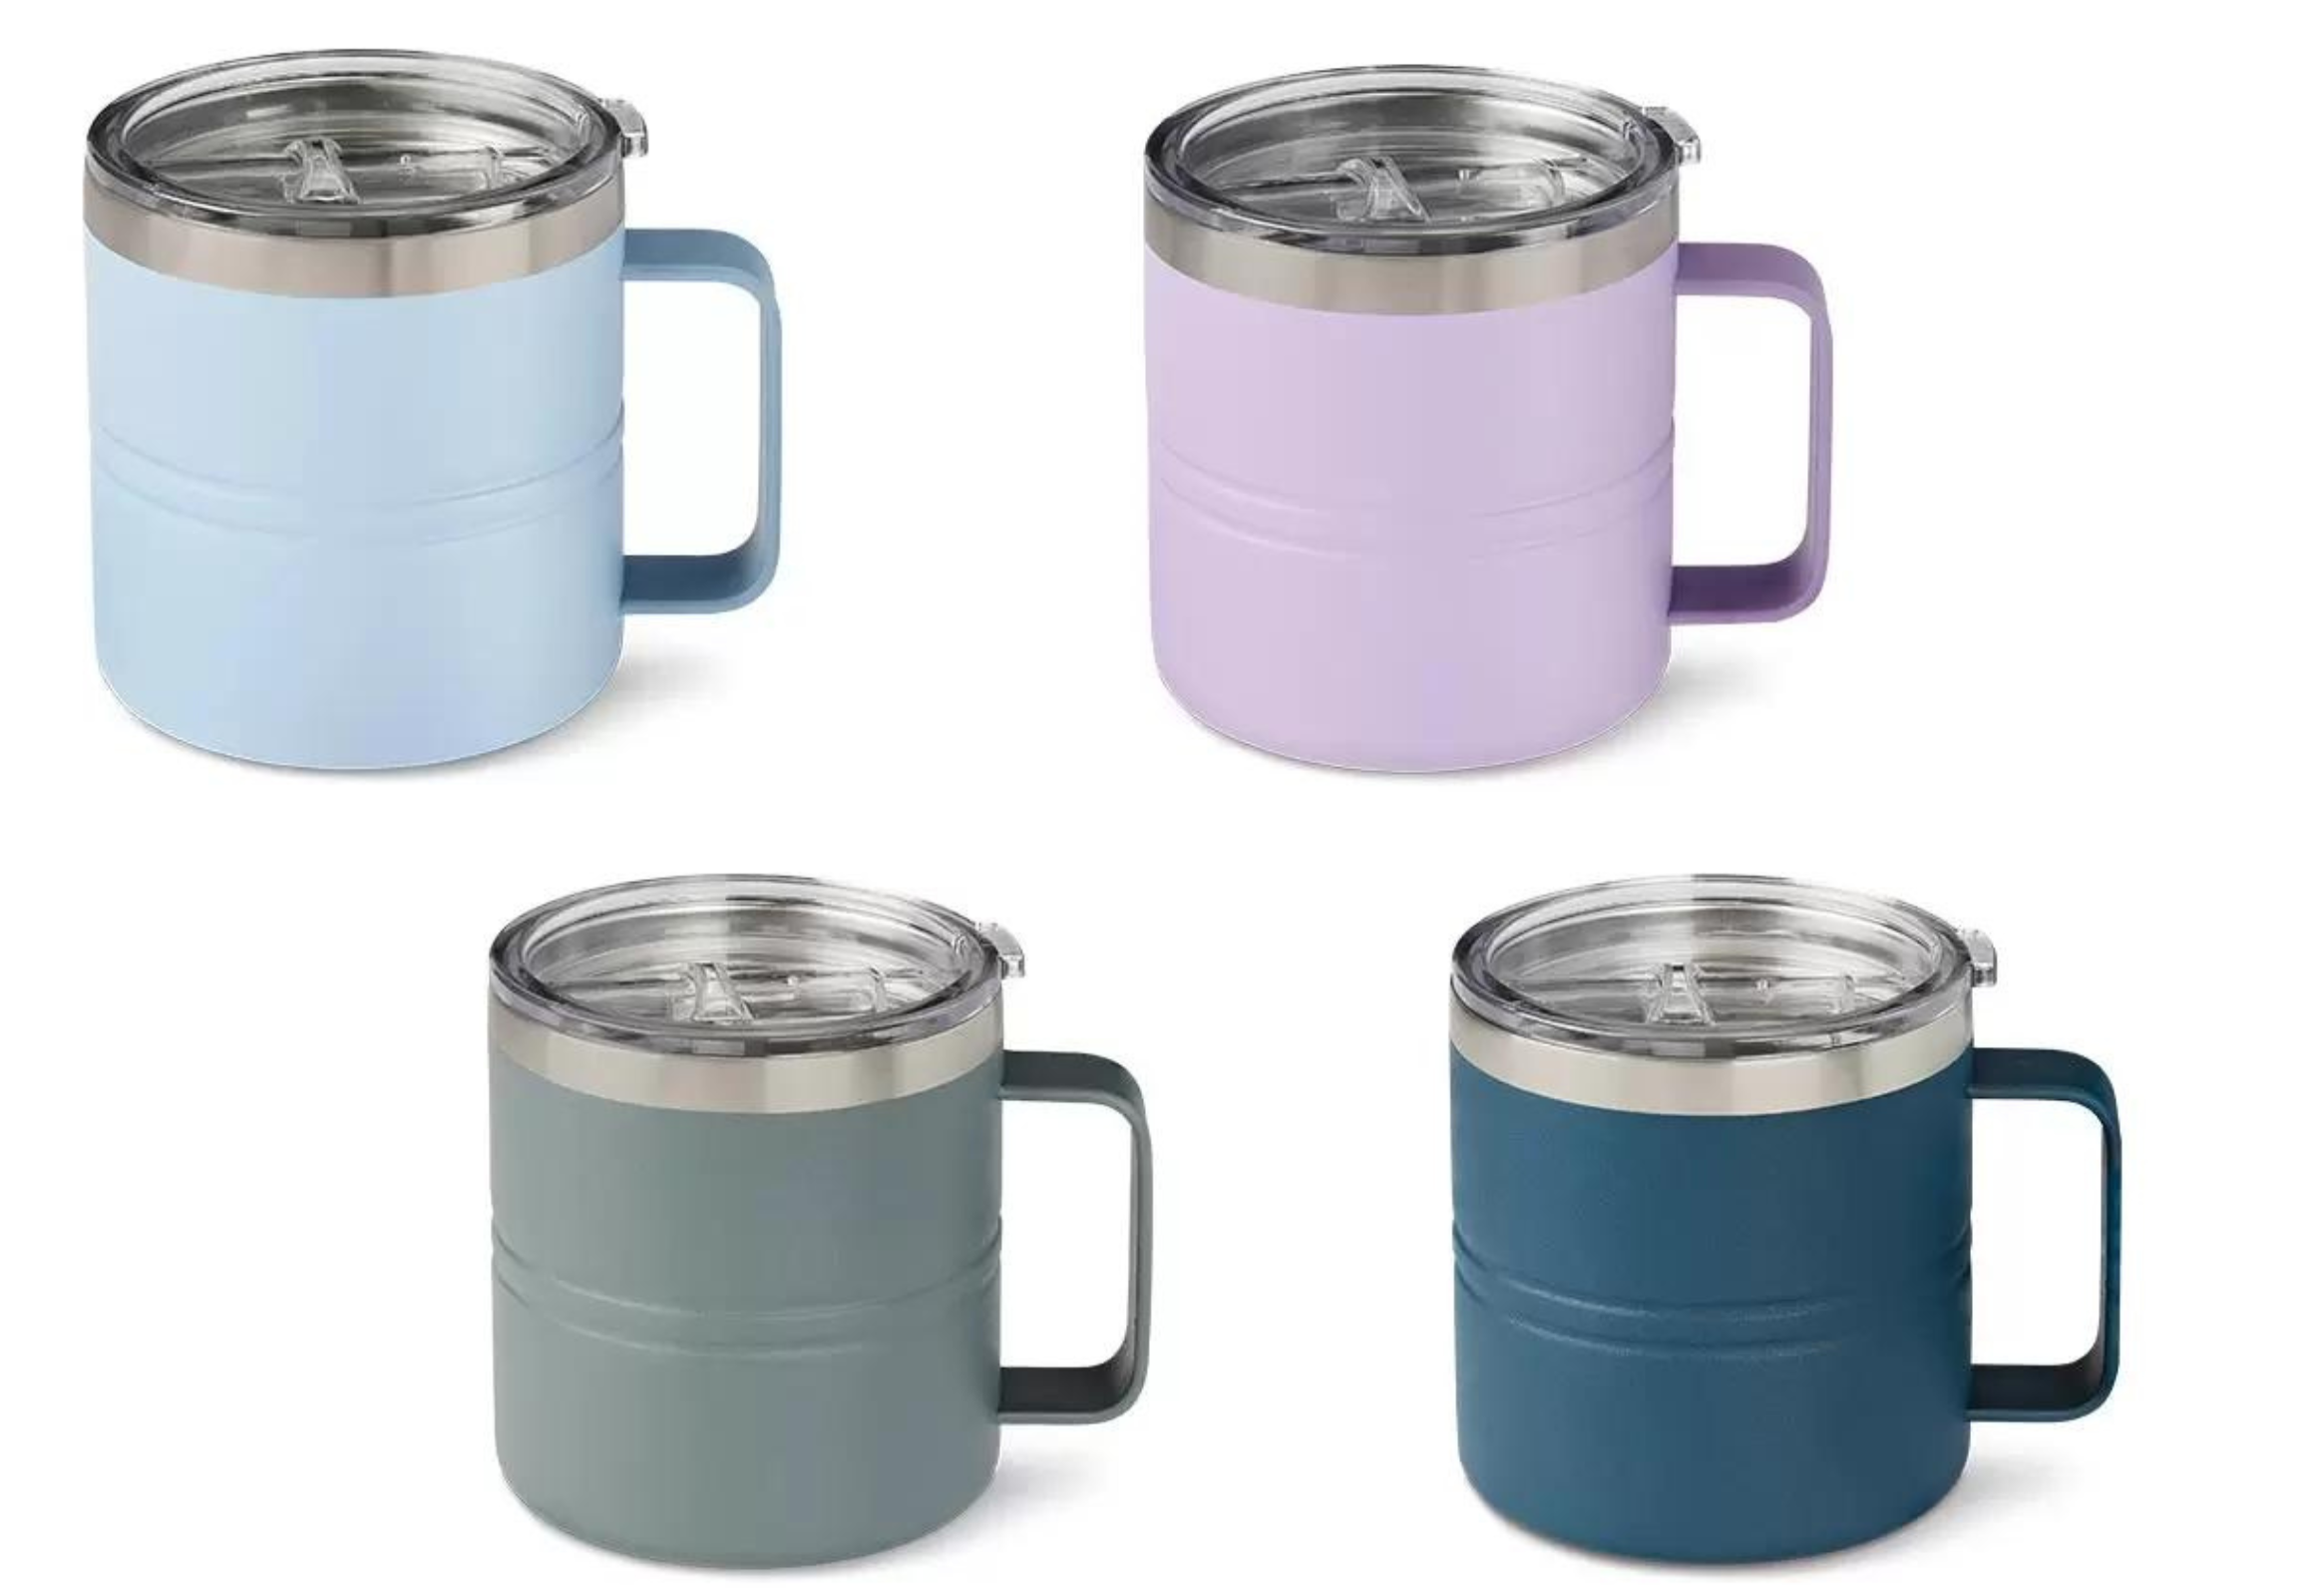 Stanley Tumbler Dupes Just Dropped at Aldi & They're Under $10 – SheKnows